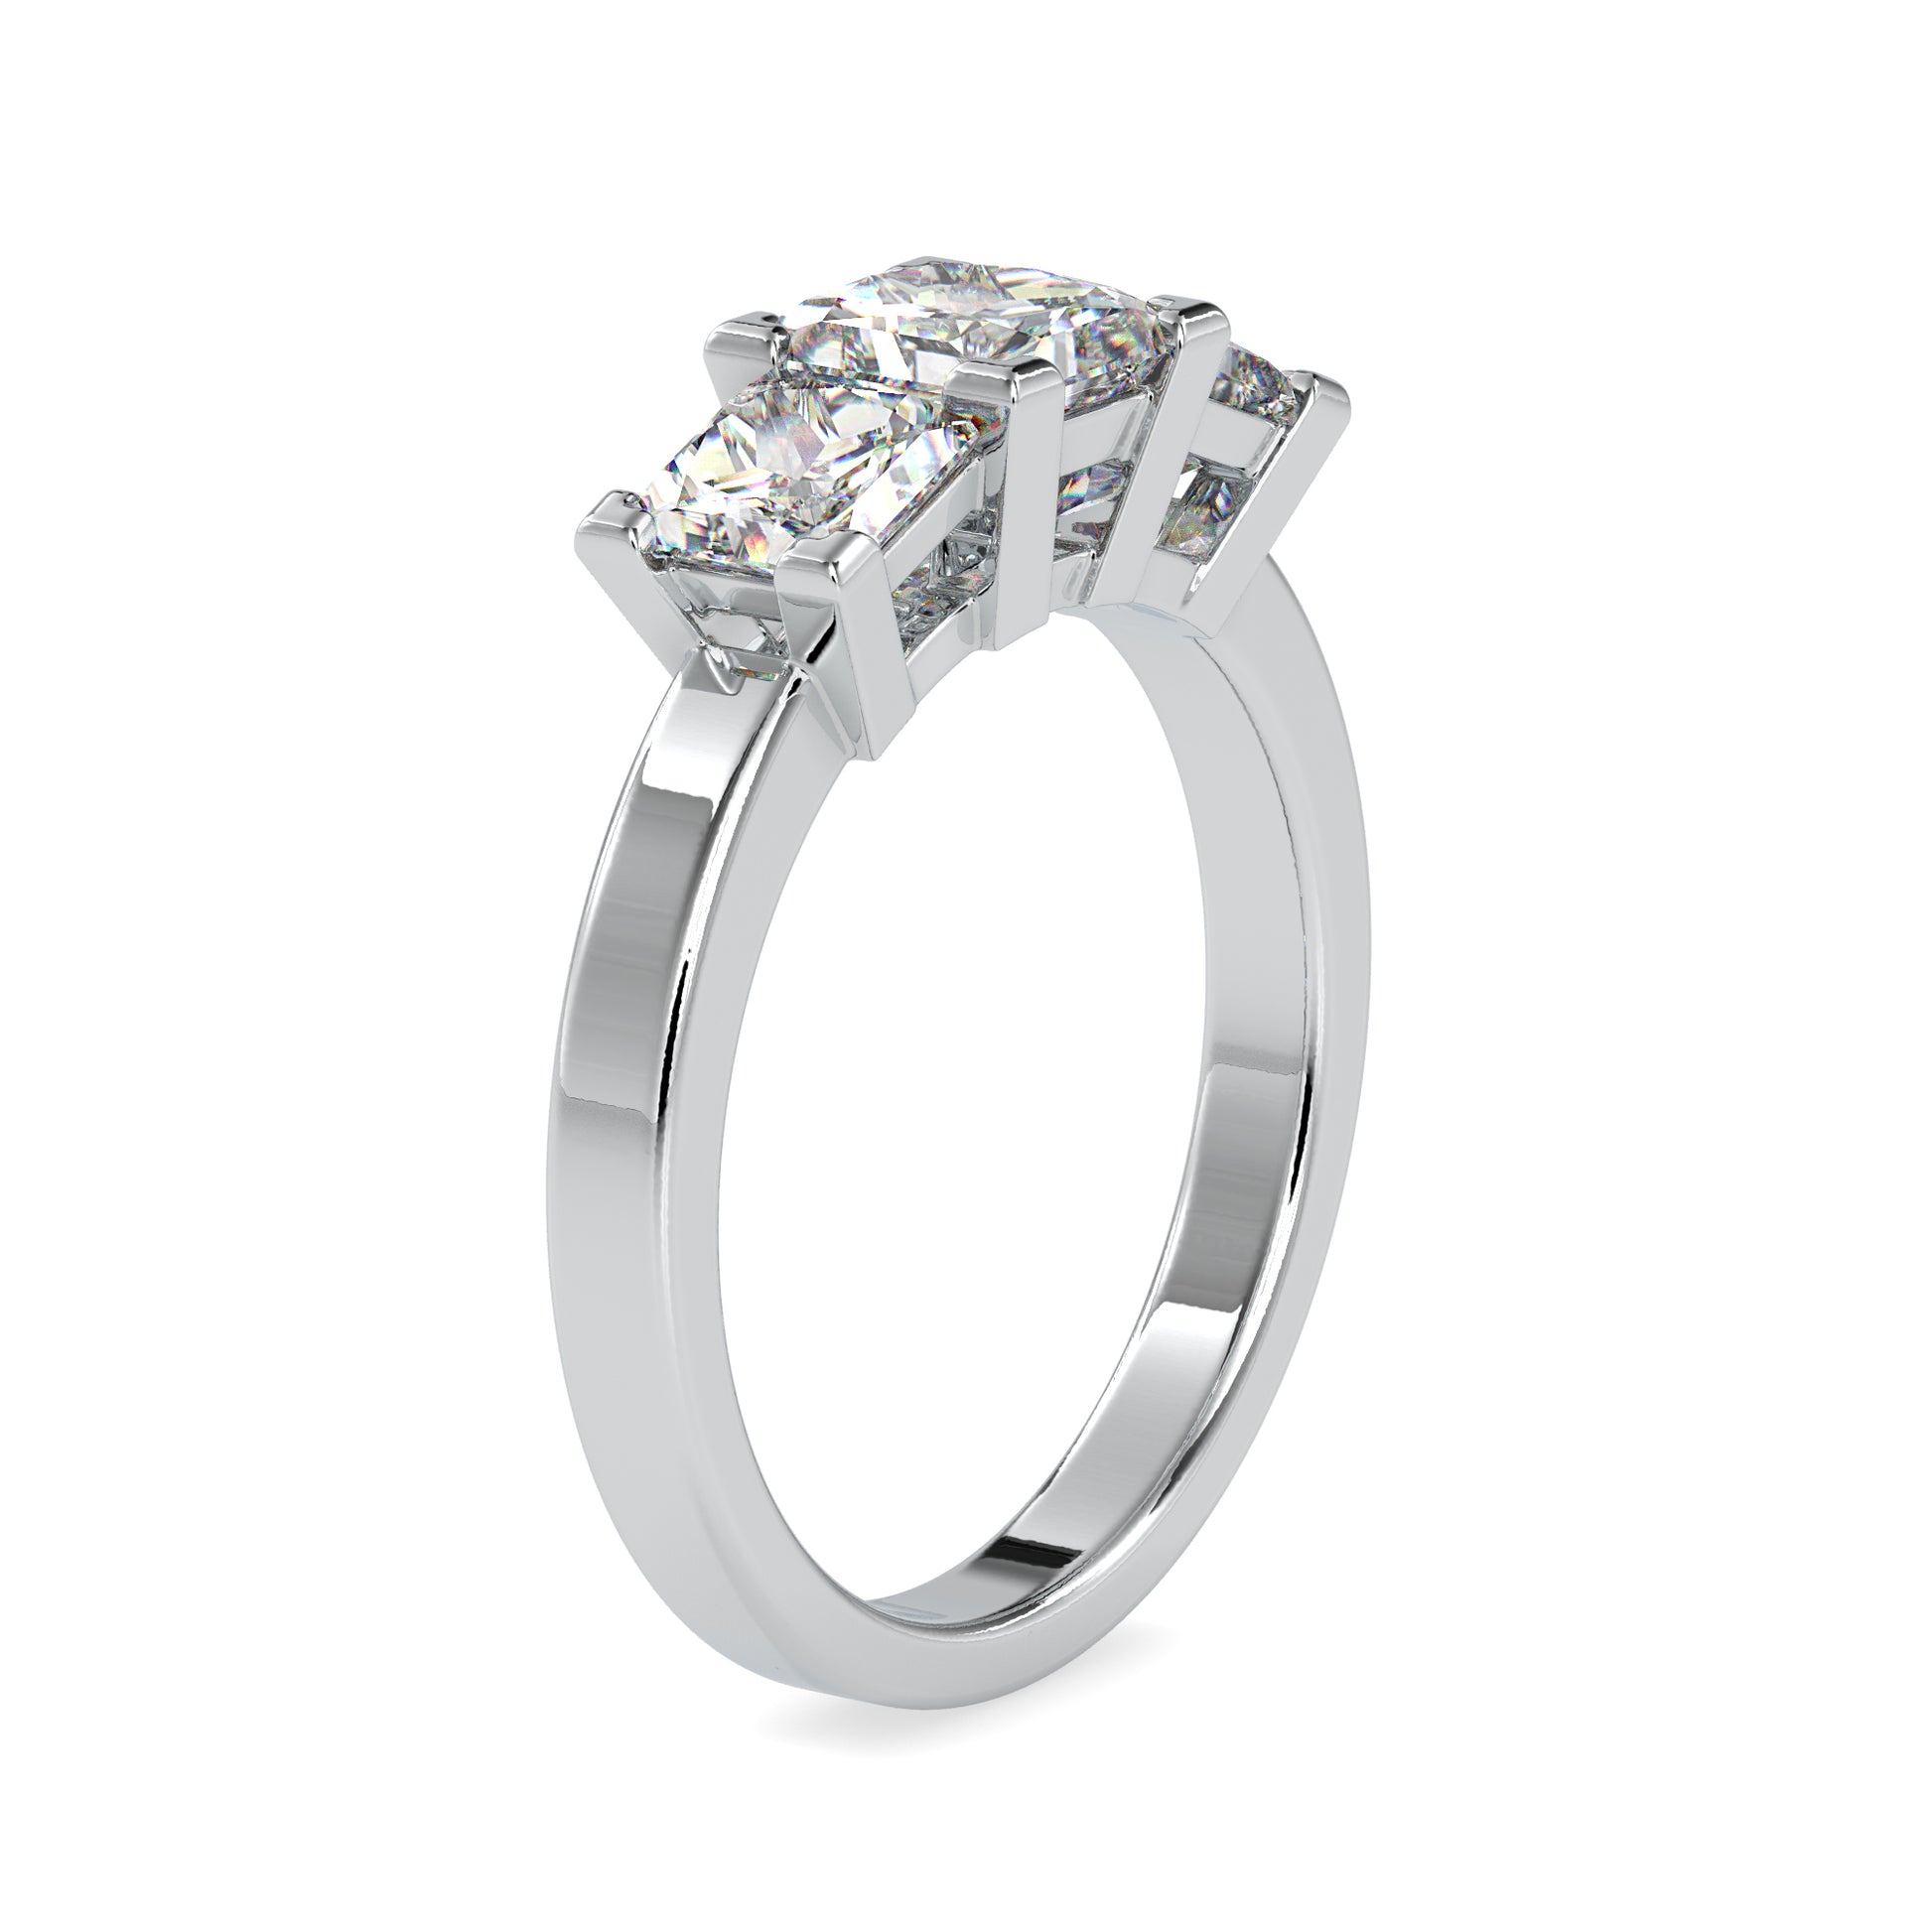 The Selene Moissanite Three Stone diamond Ring IN Gold and Sterling Silver - 2.89 Ct -